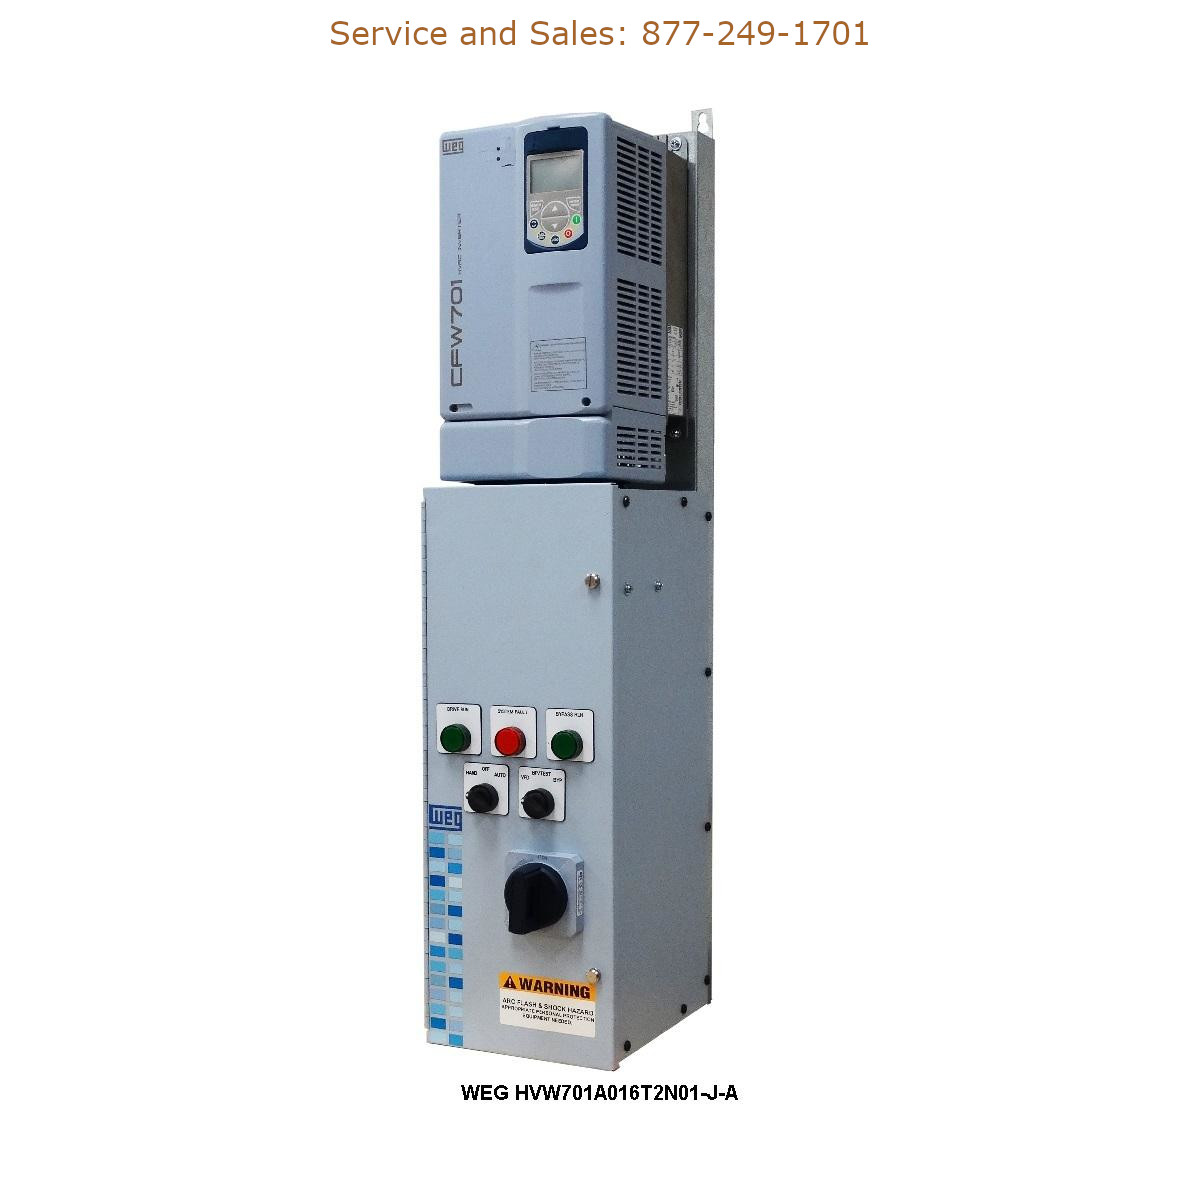 WEG HVW701A016T2N01-J-A WEG Model Number HVW701A016T2N01-J-A WEG Drives, Variable Speed Drives Repair Service, Troubleshooting, Replacement Parts https://gesrepair.com/wp-content/uploads/2022/WEG/WEG_HVW701A016T2N01-J-A_Drives_Variable_Speed_Drives.jpg